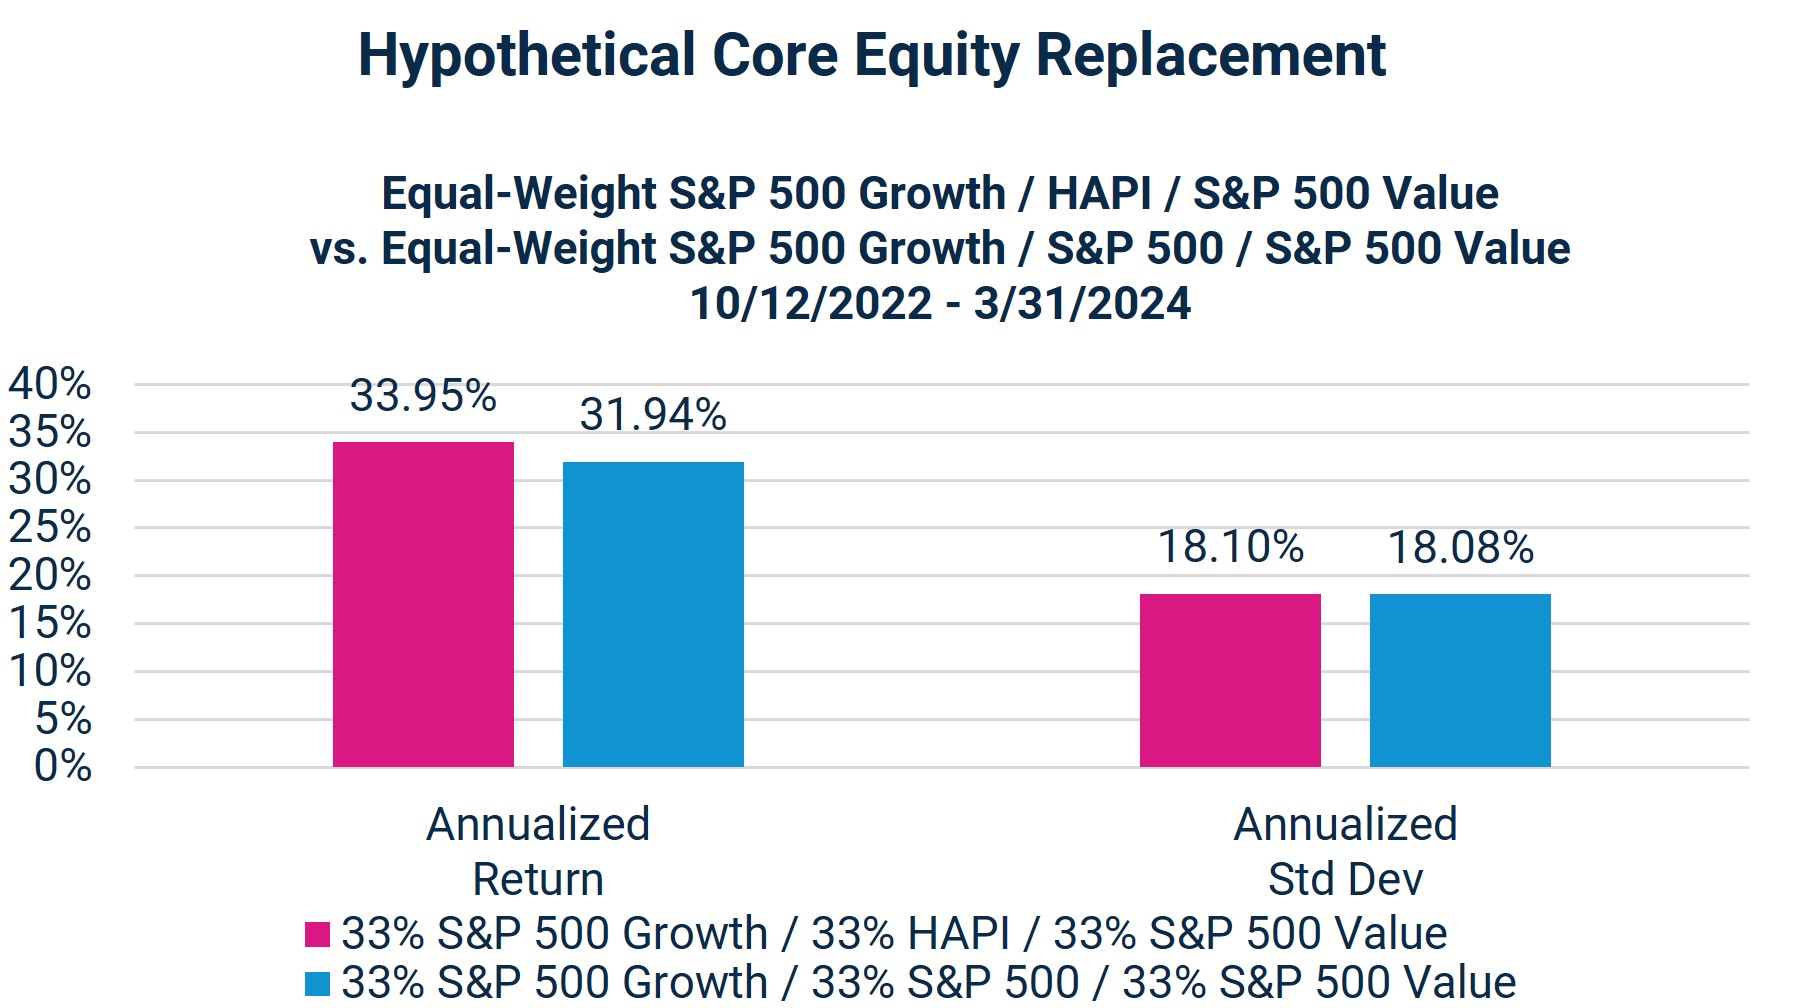 Hypothetical Core Equity Replacement